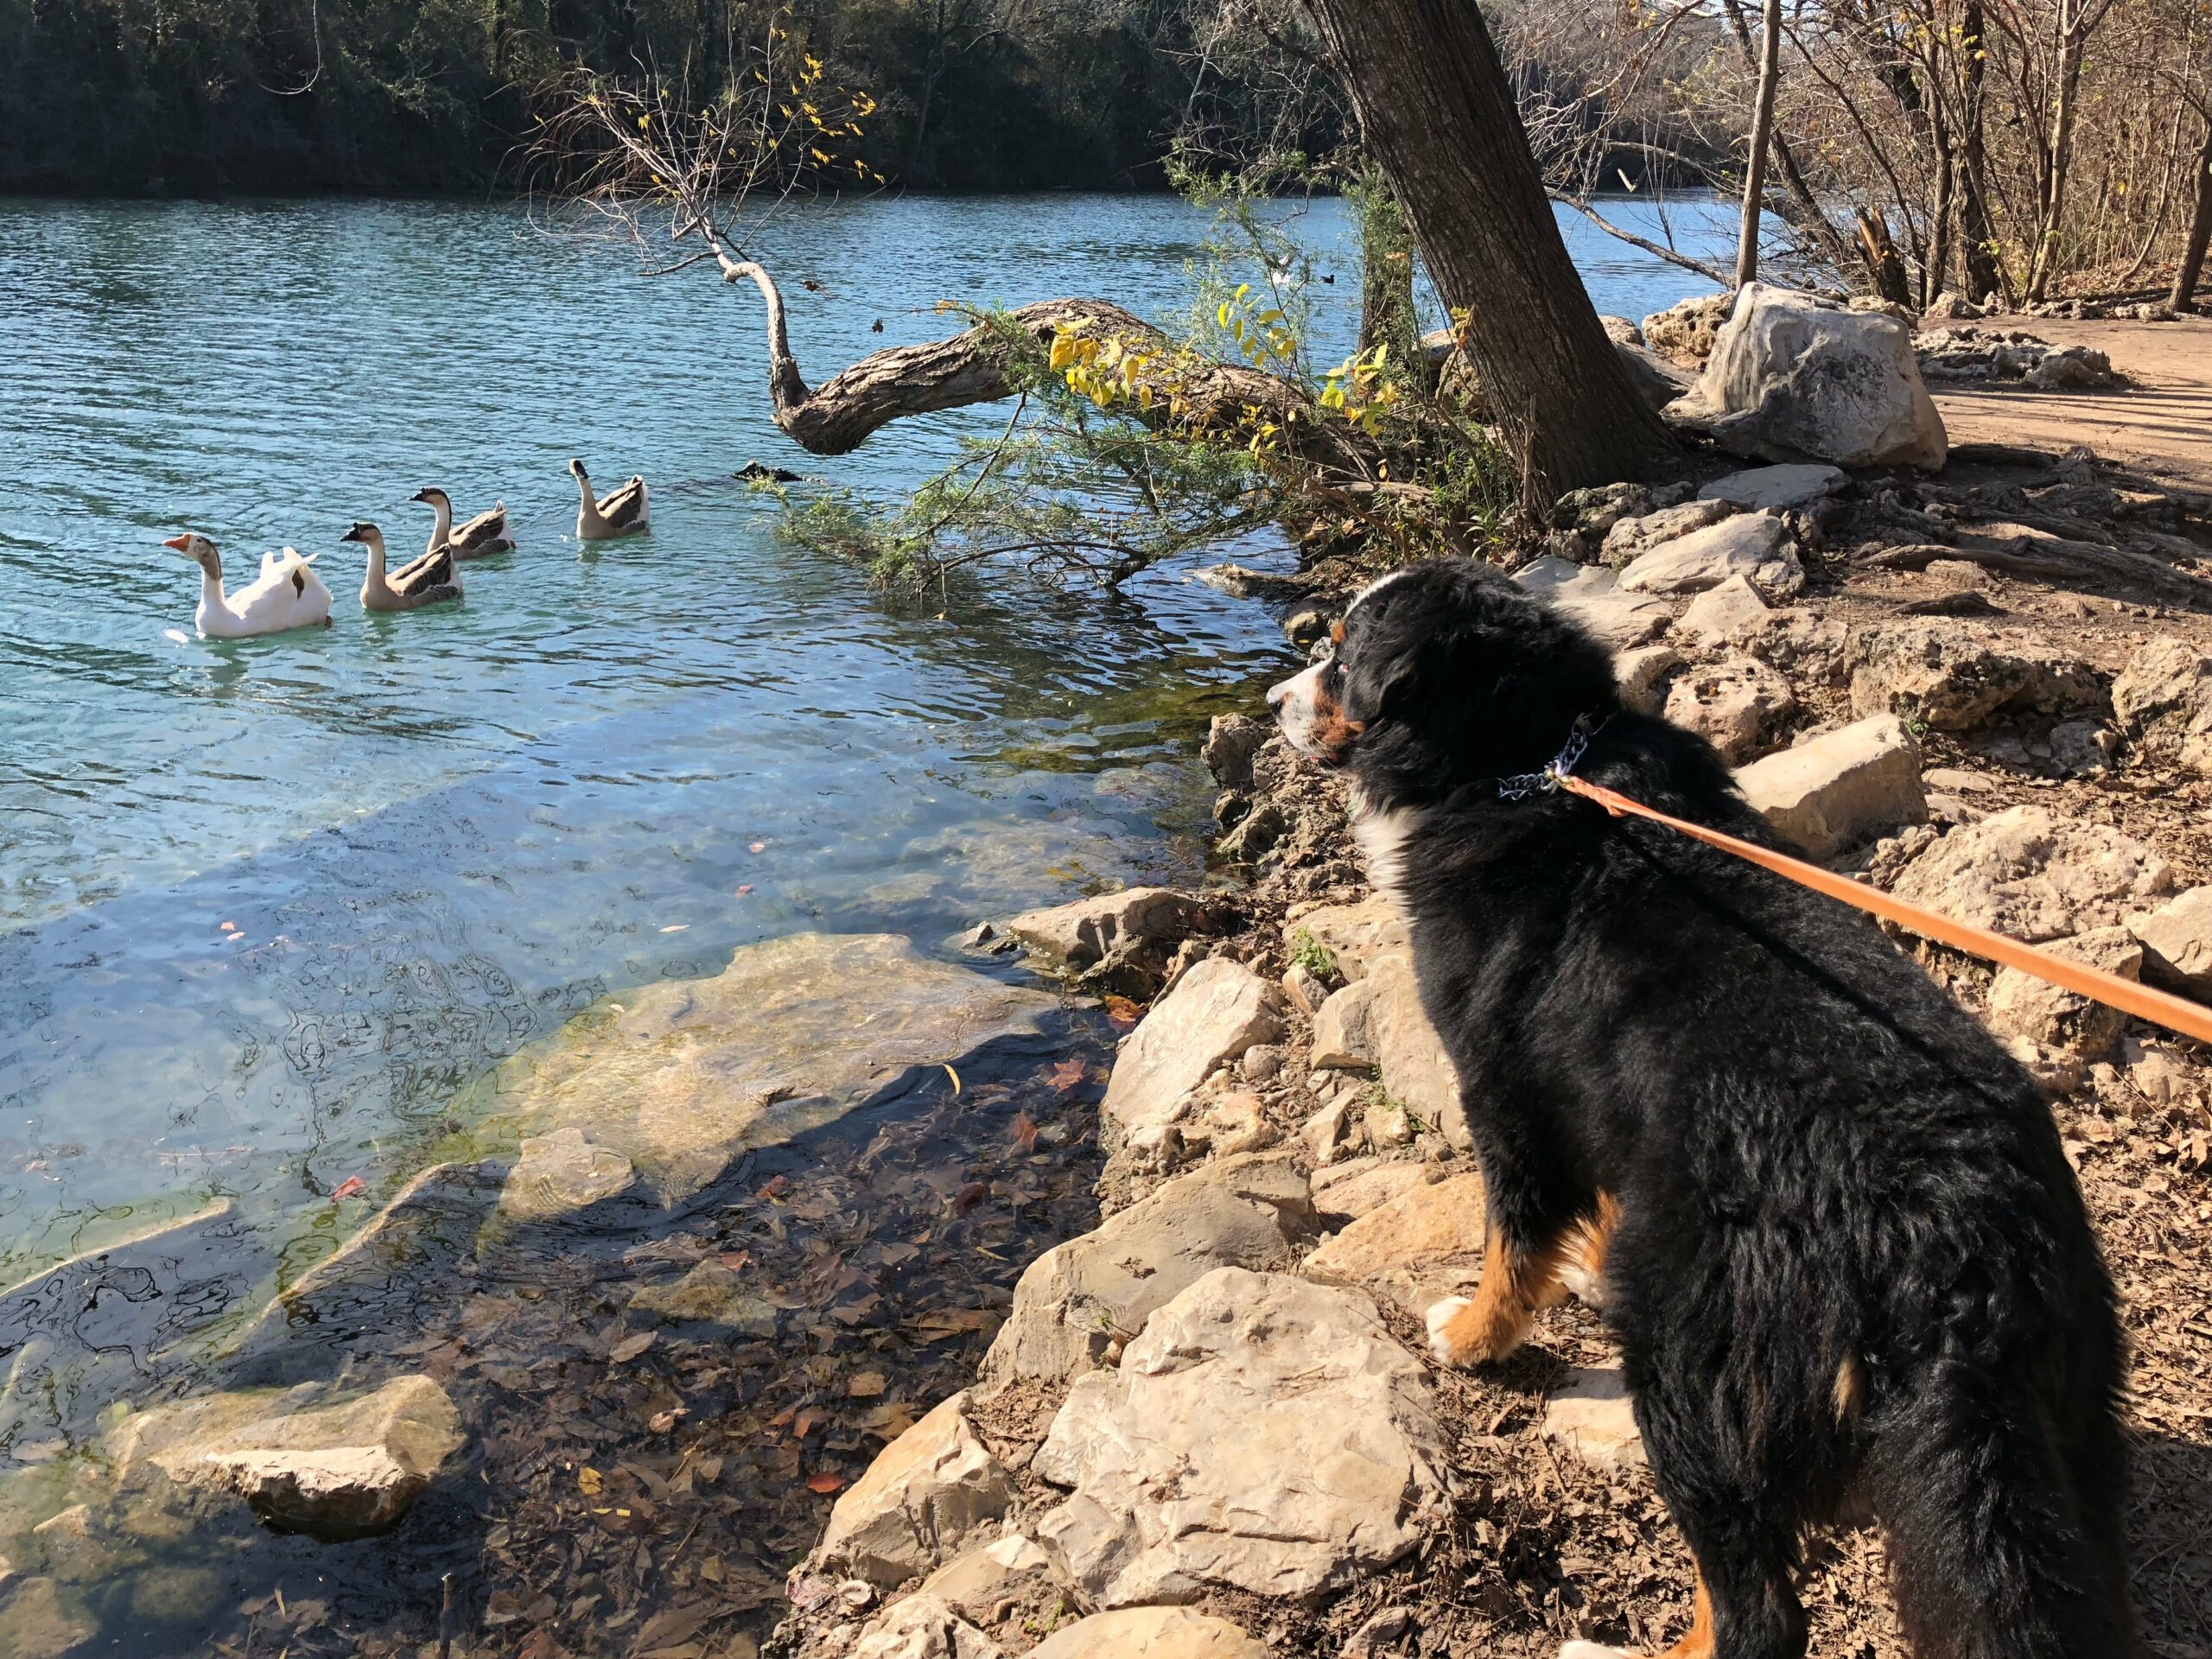 A photo of Bernie staring at the ducks in the river.